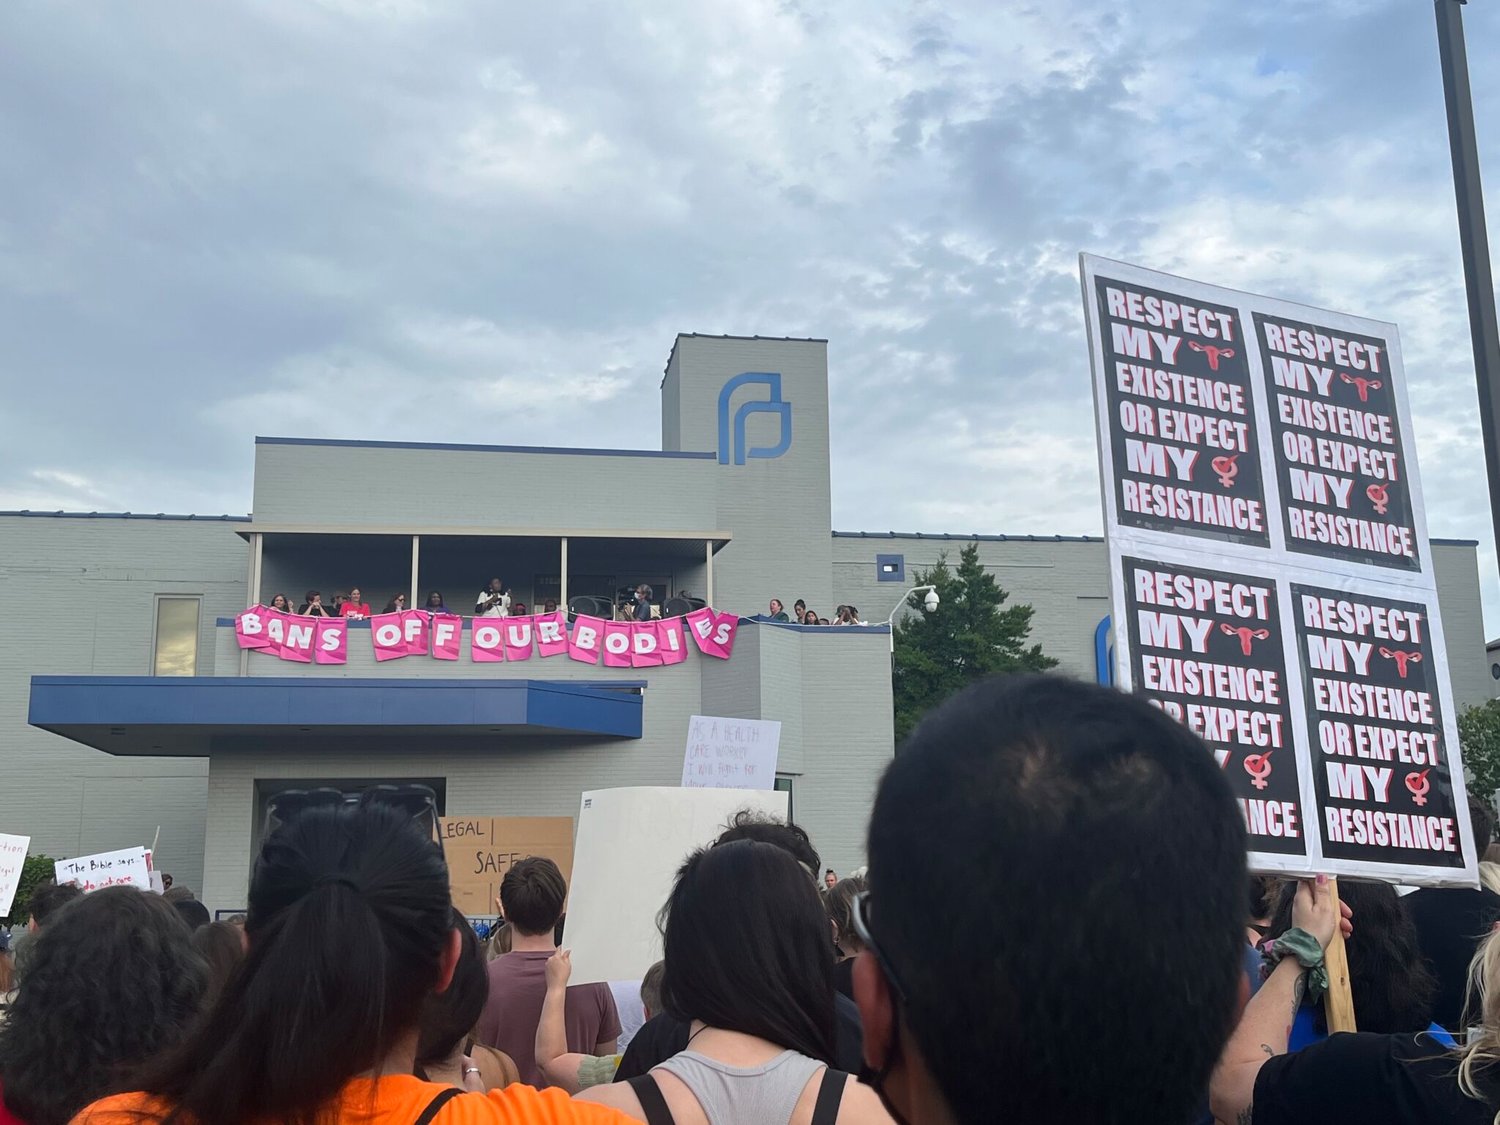 The Planned Parenthood in St. Louis on June 24, 2022.